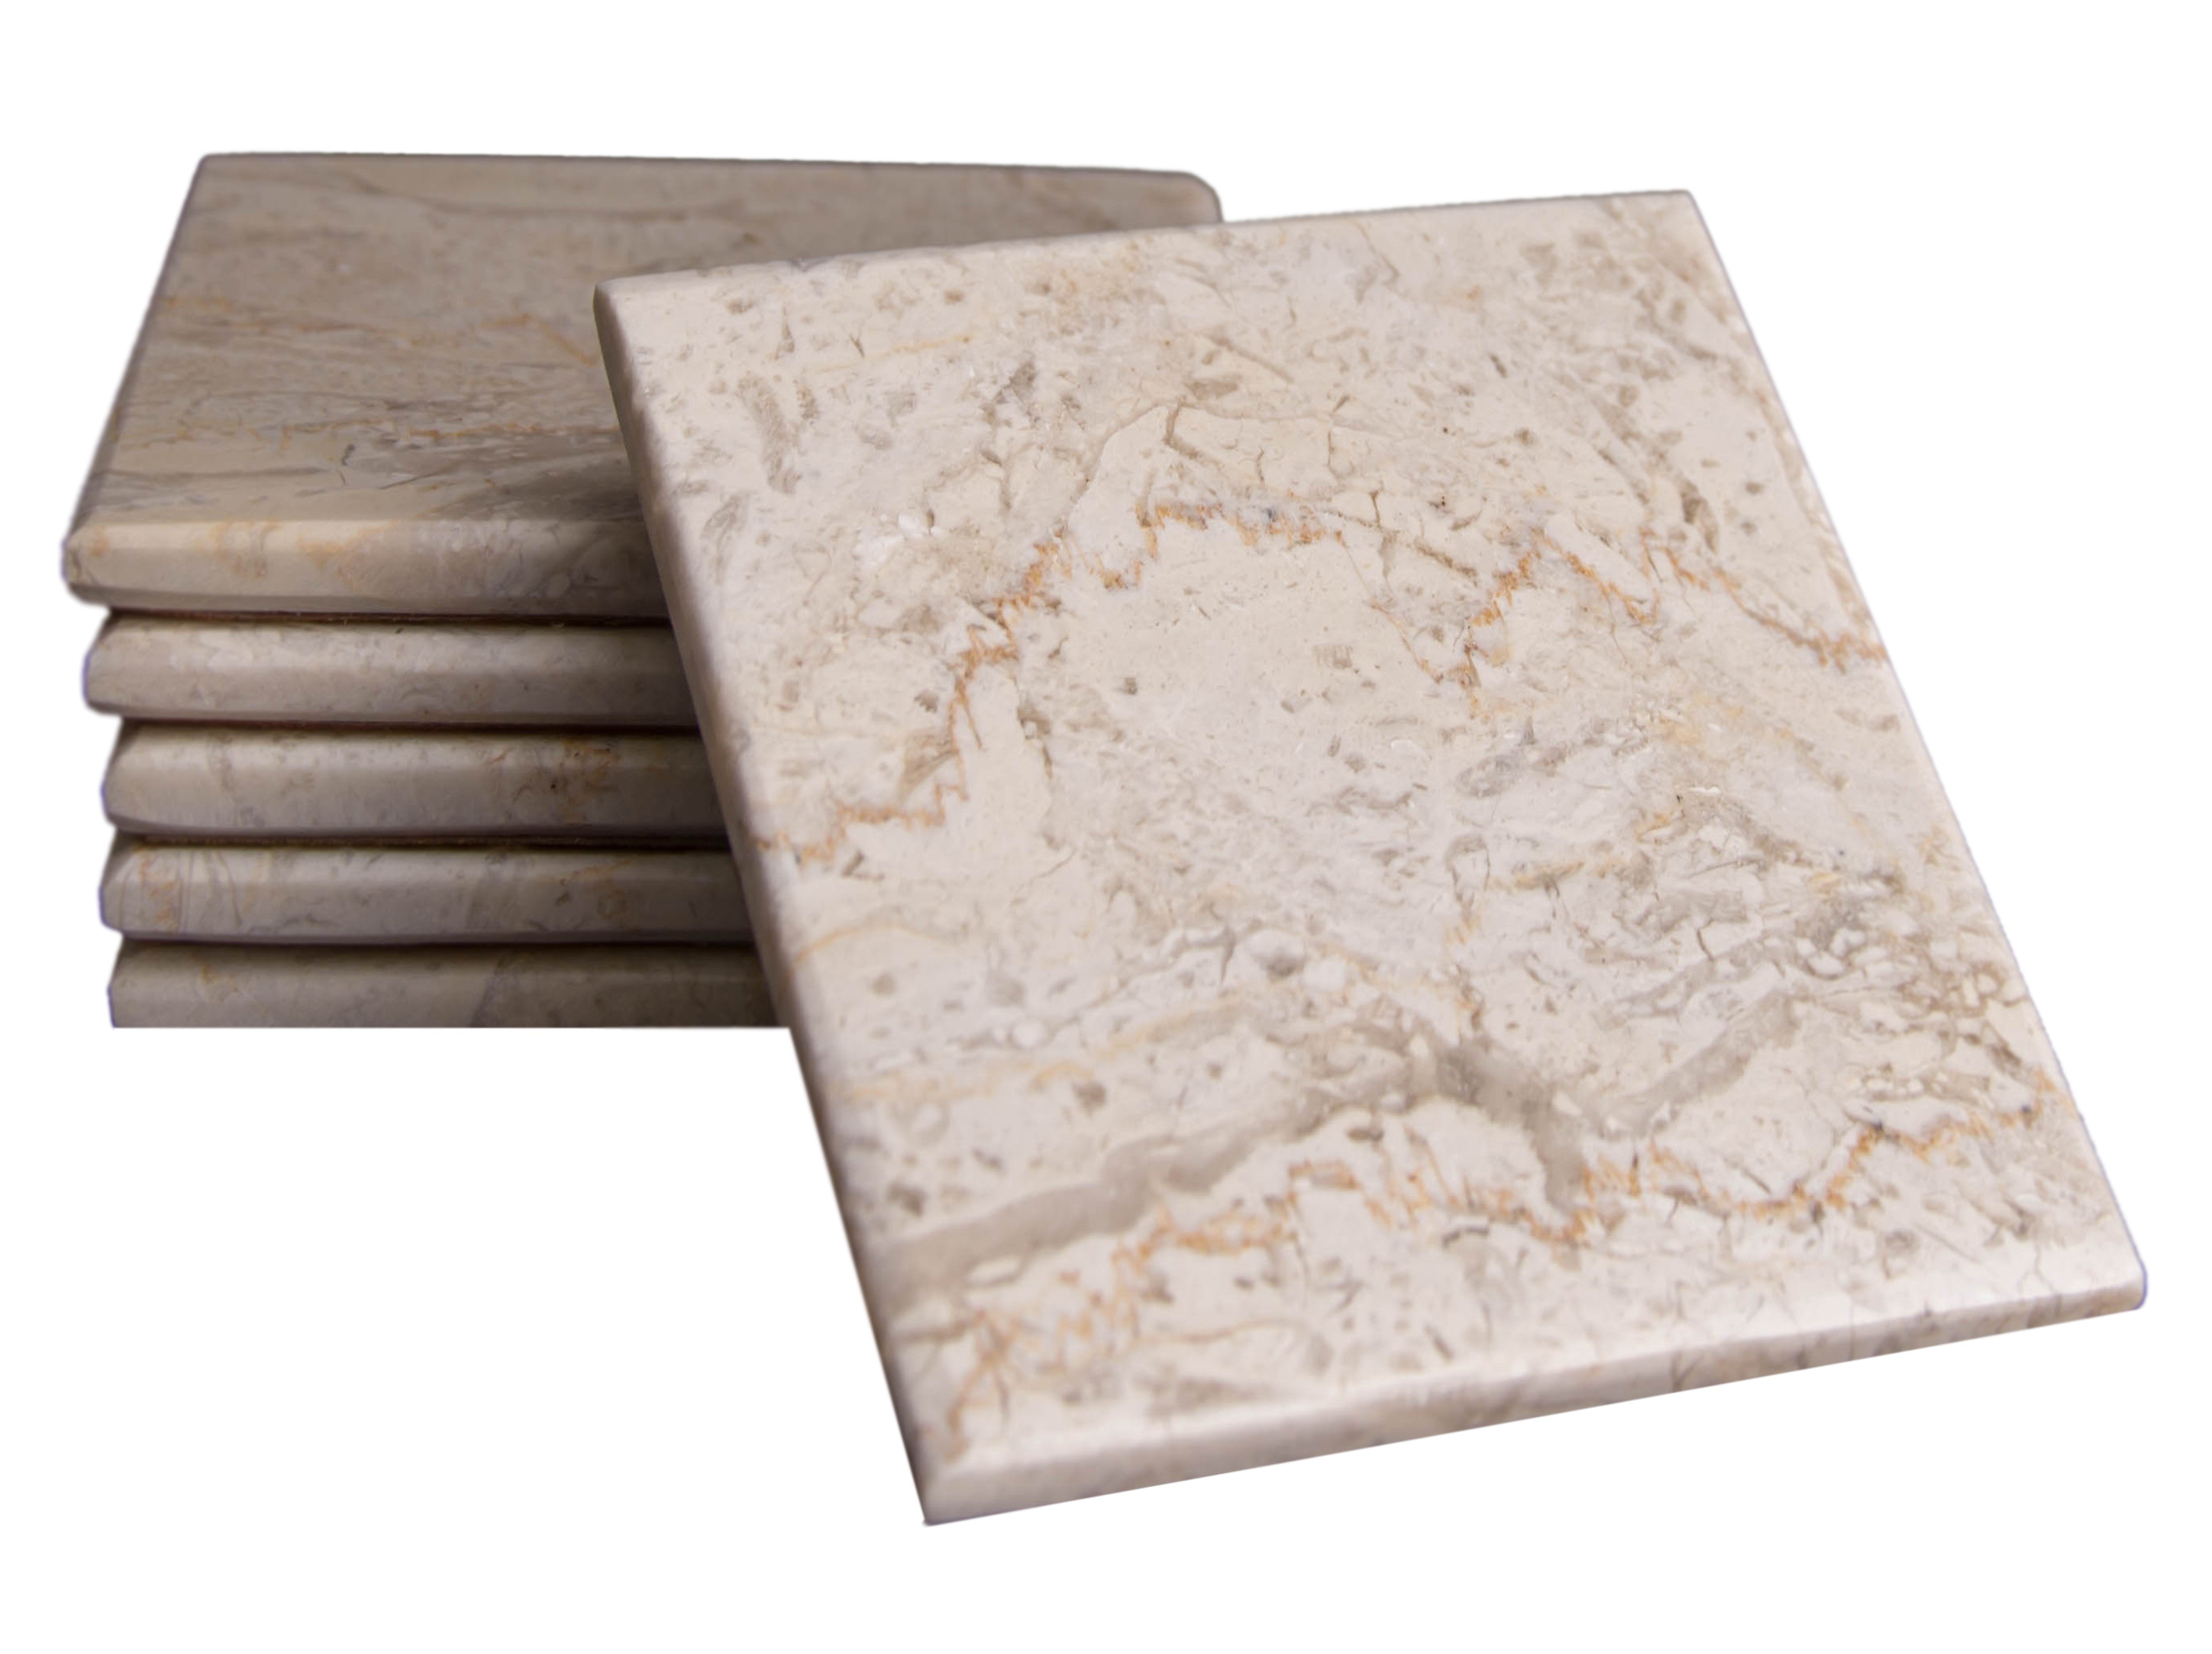 Set of 6 - Beige Marble Stone Coasters Polished Coasters 3.5 x 3.5 Inches ( 9x9 cm) Square Protection from Drink Rings -CraftsOfEgypt